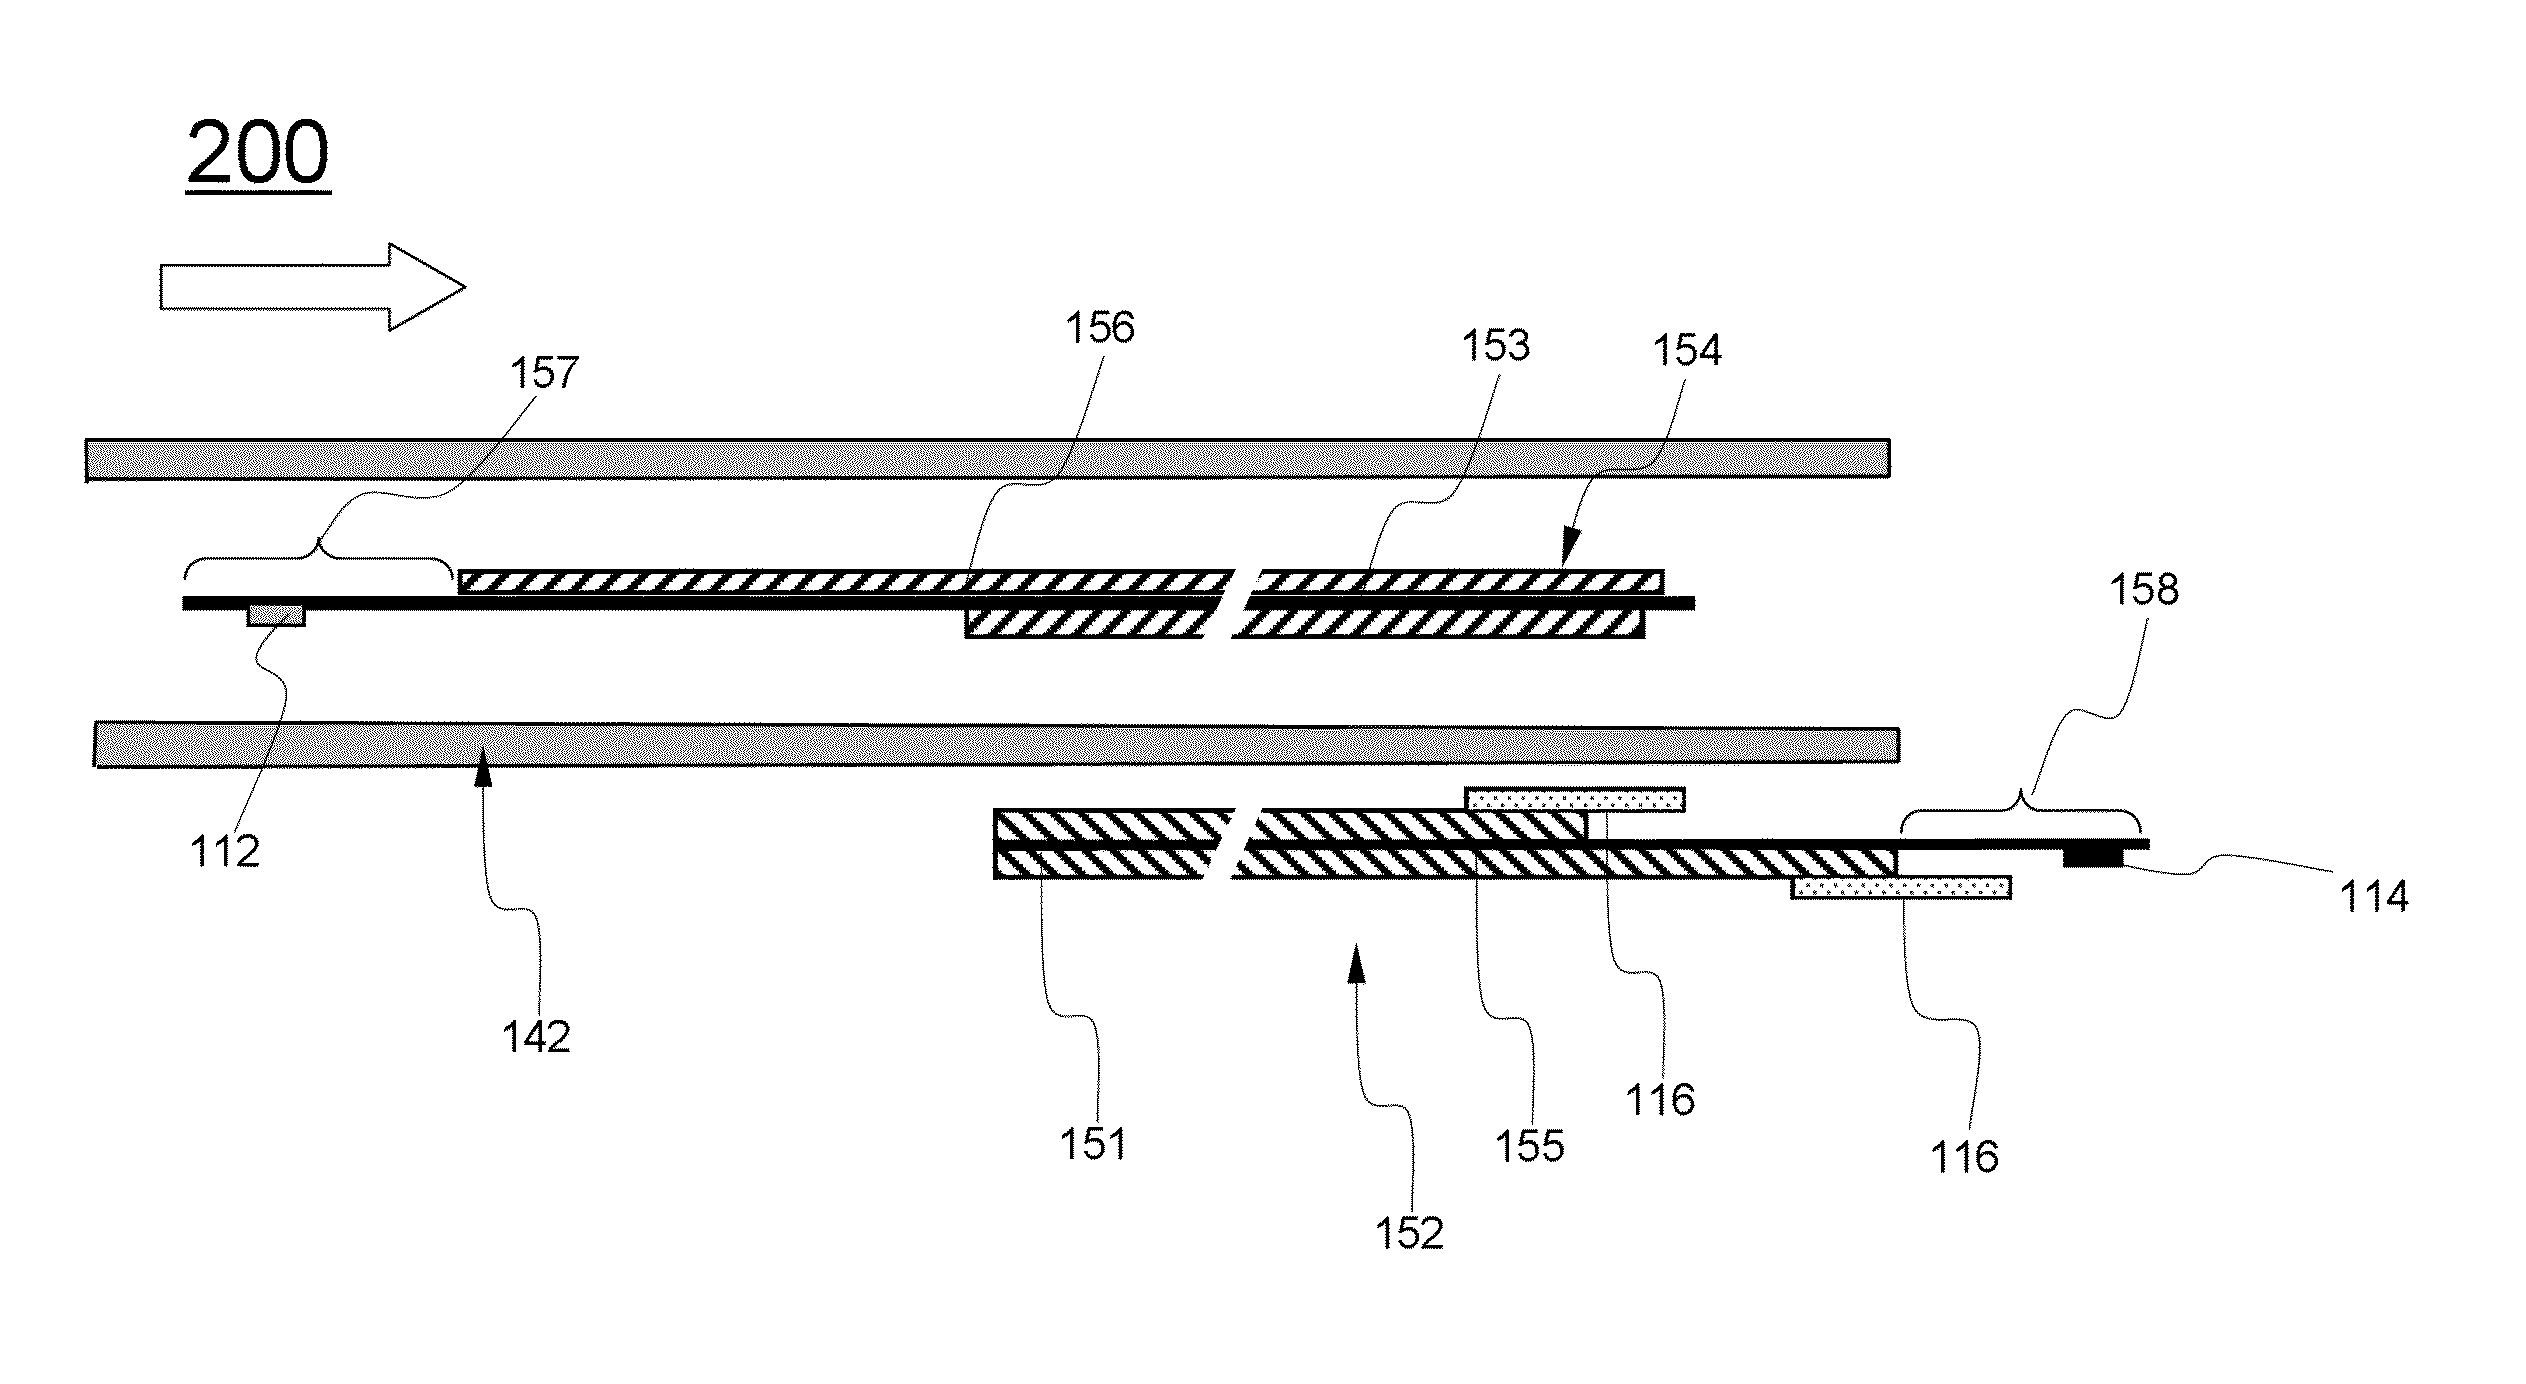 Secondary battery of novel structure